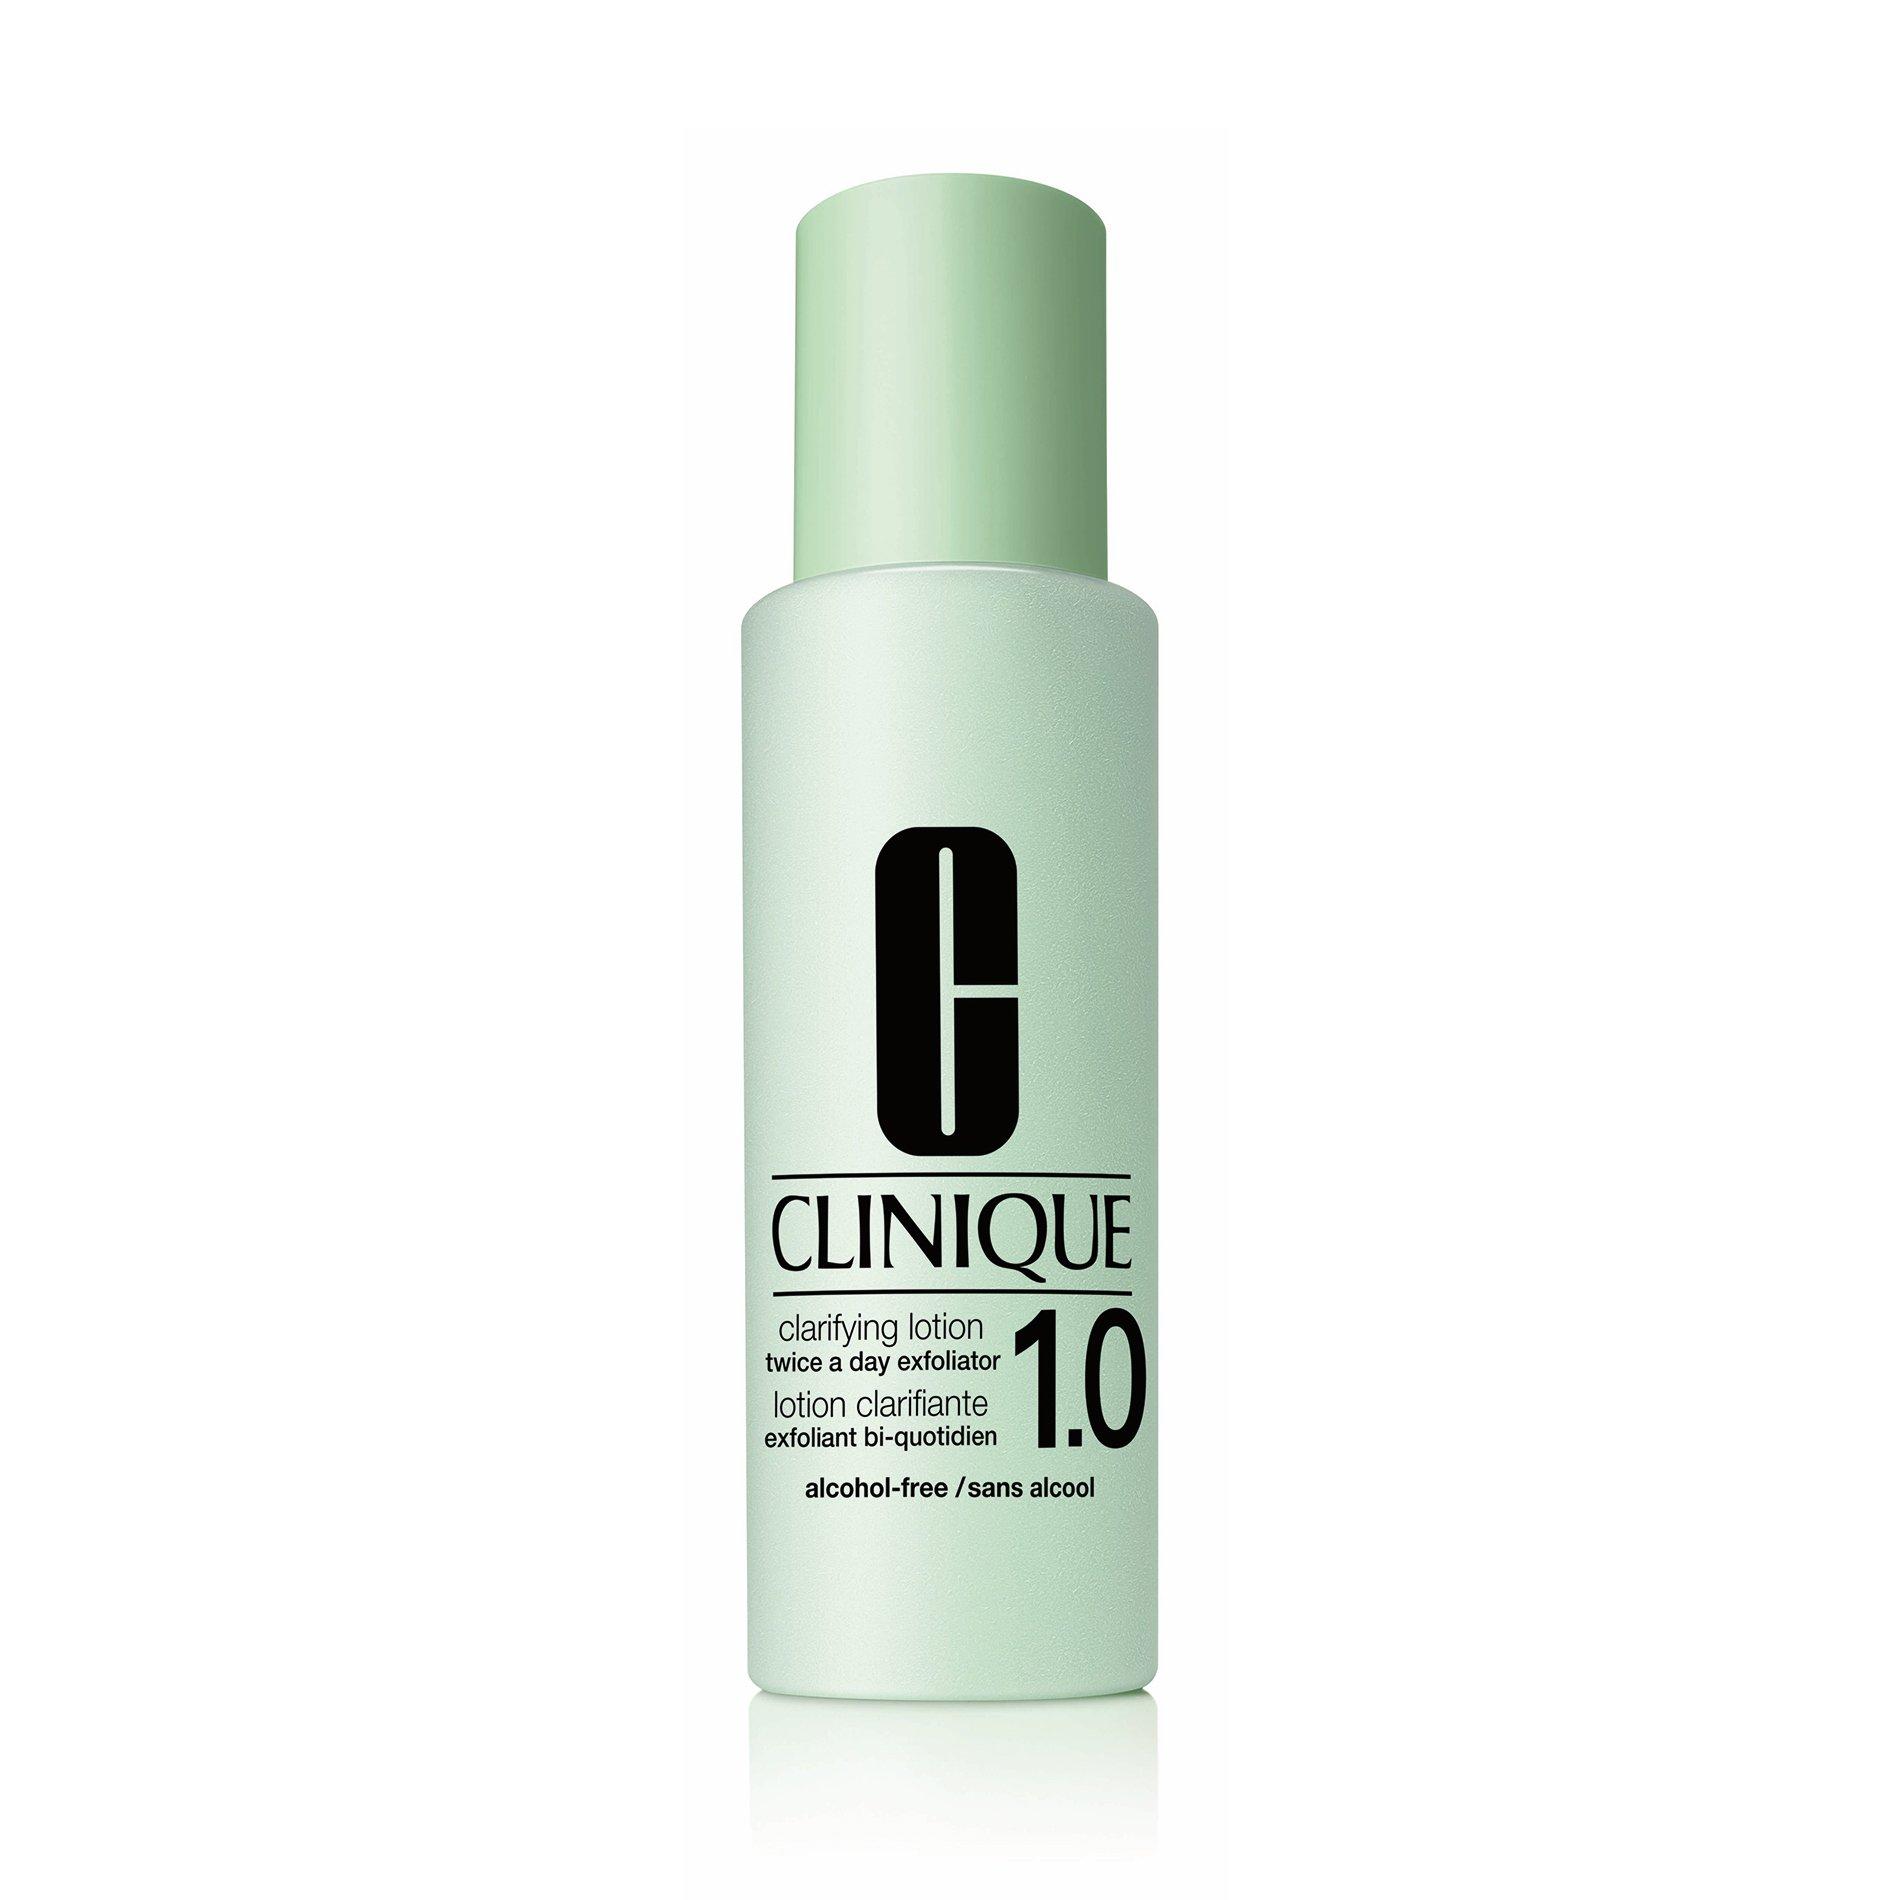 Image of CLINIQUE Clarifying Lotion 1.0 - 200ml